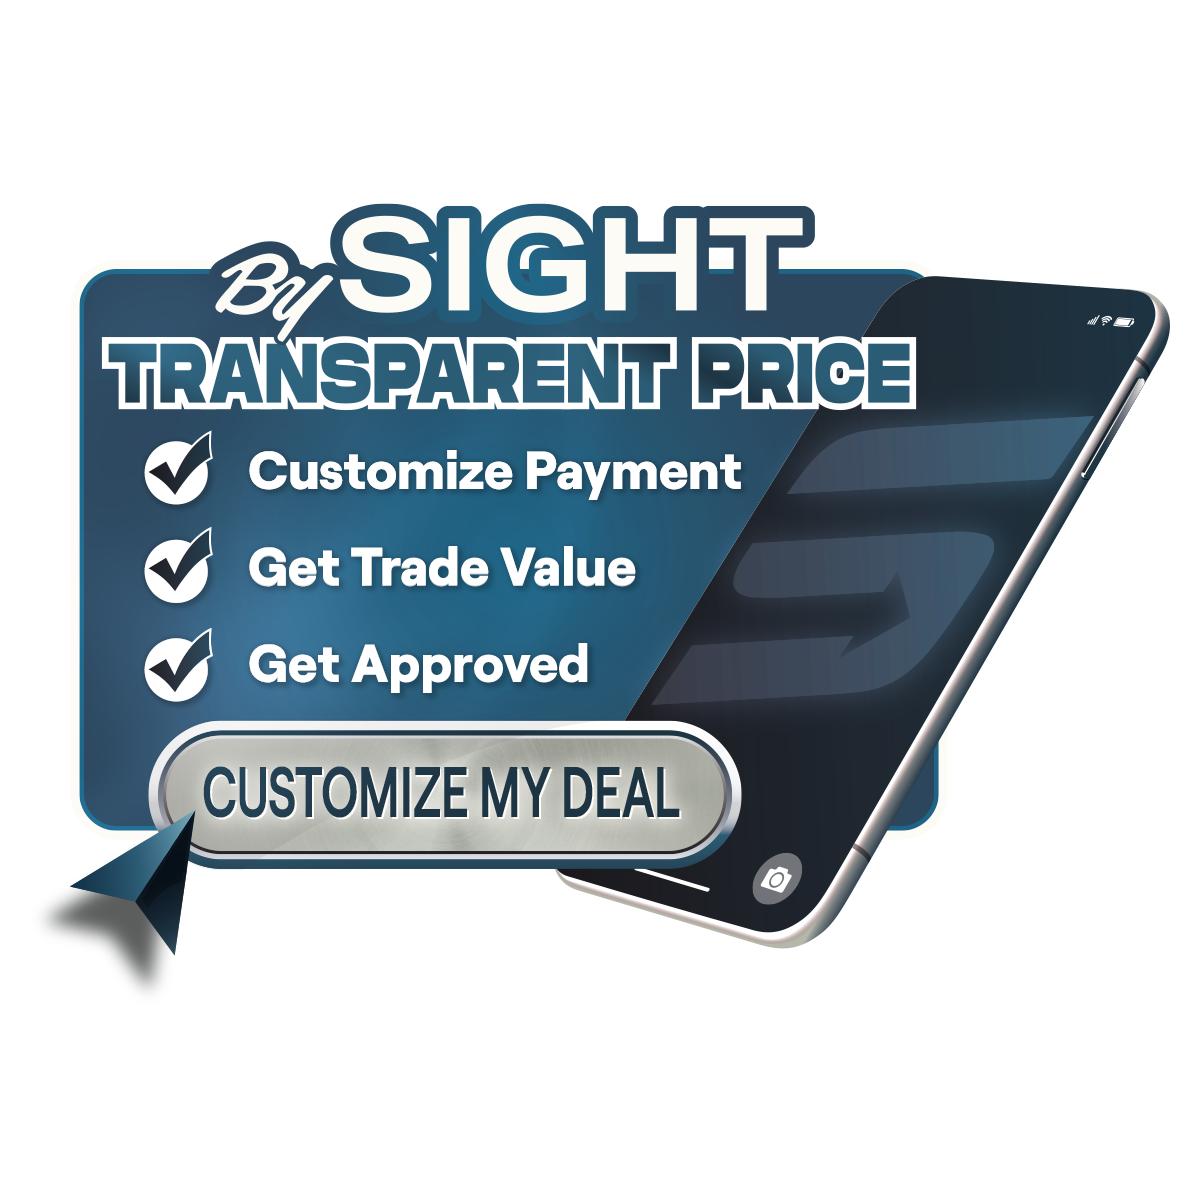 Sight Transparent Price - Calculate Your Budget